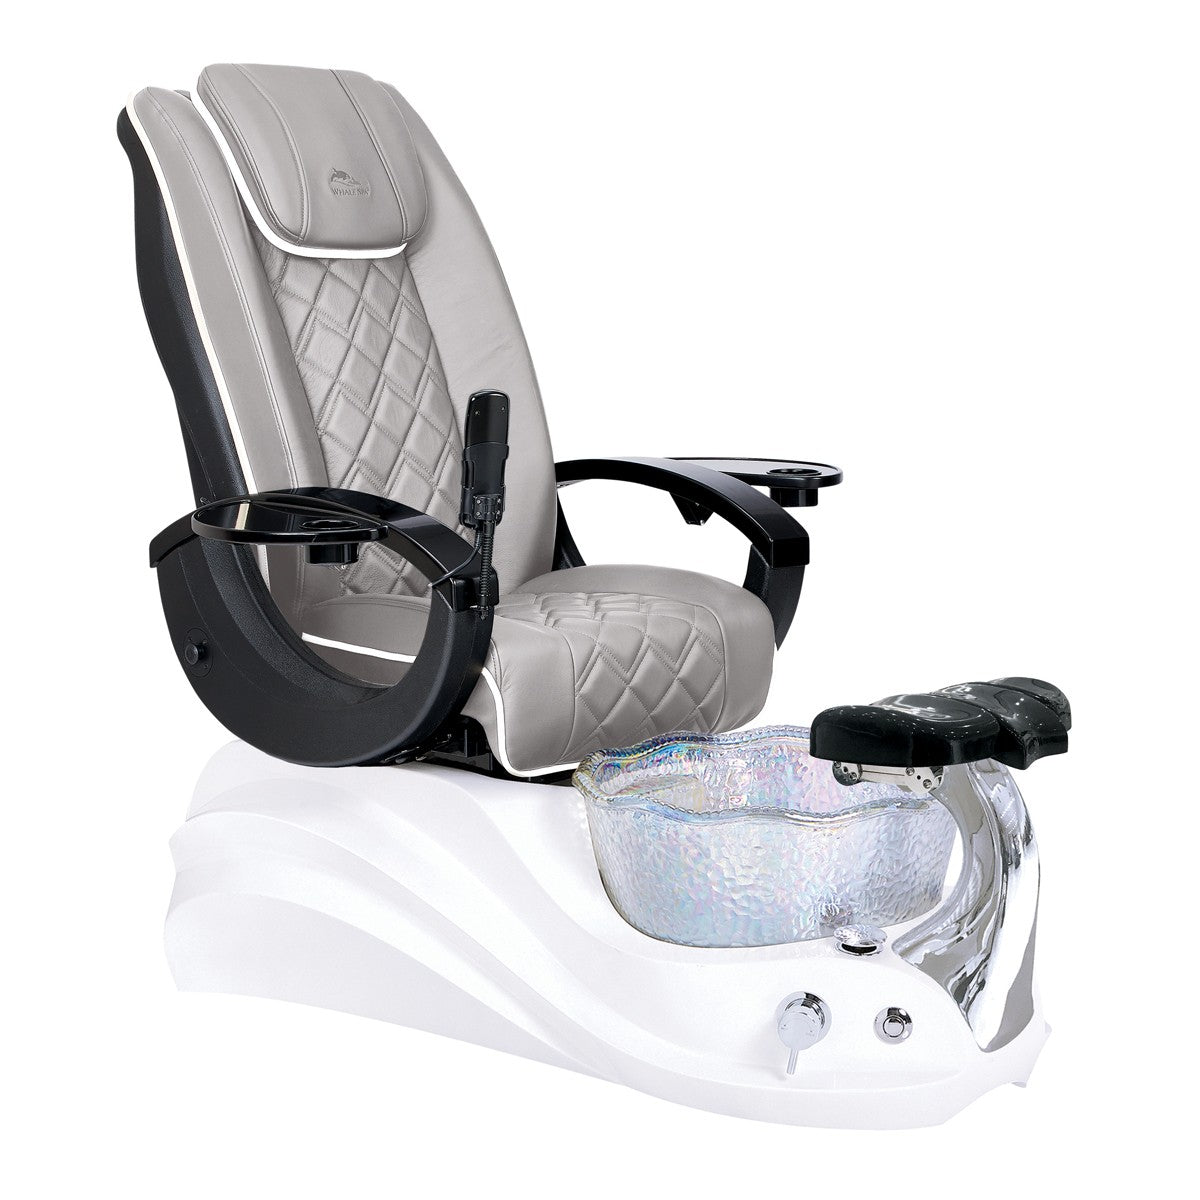 Whale Spa Whale Spa Pedicure Chair Crane with Free Trolley &amp; Tech Stool Pedicure Chair - ChairsThatGive